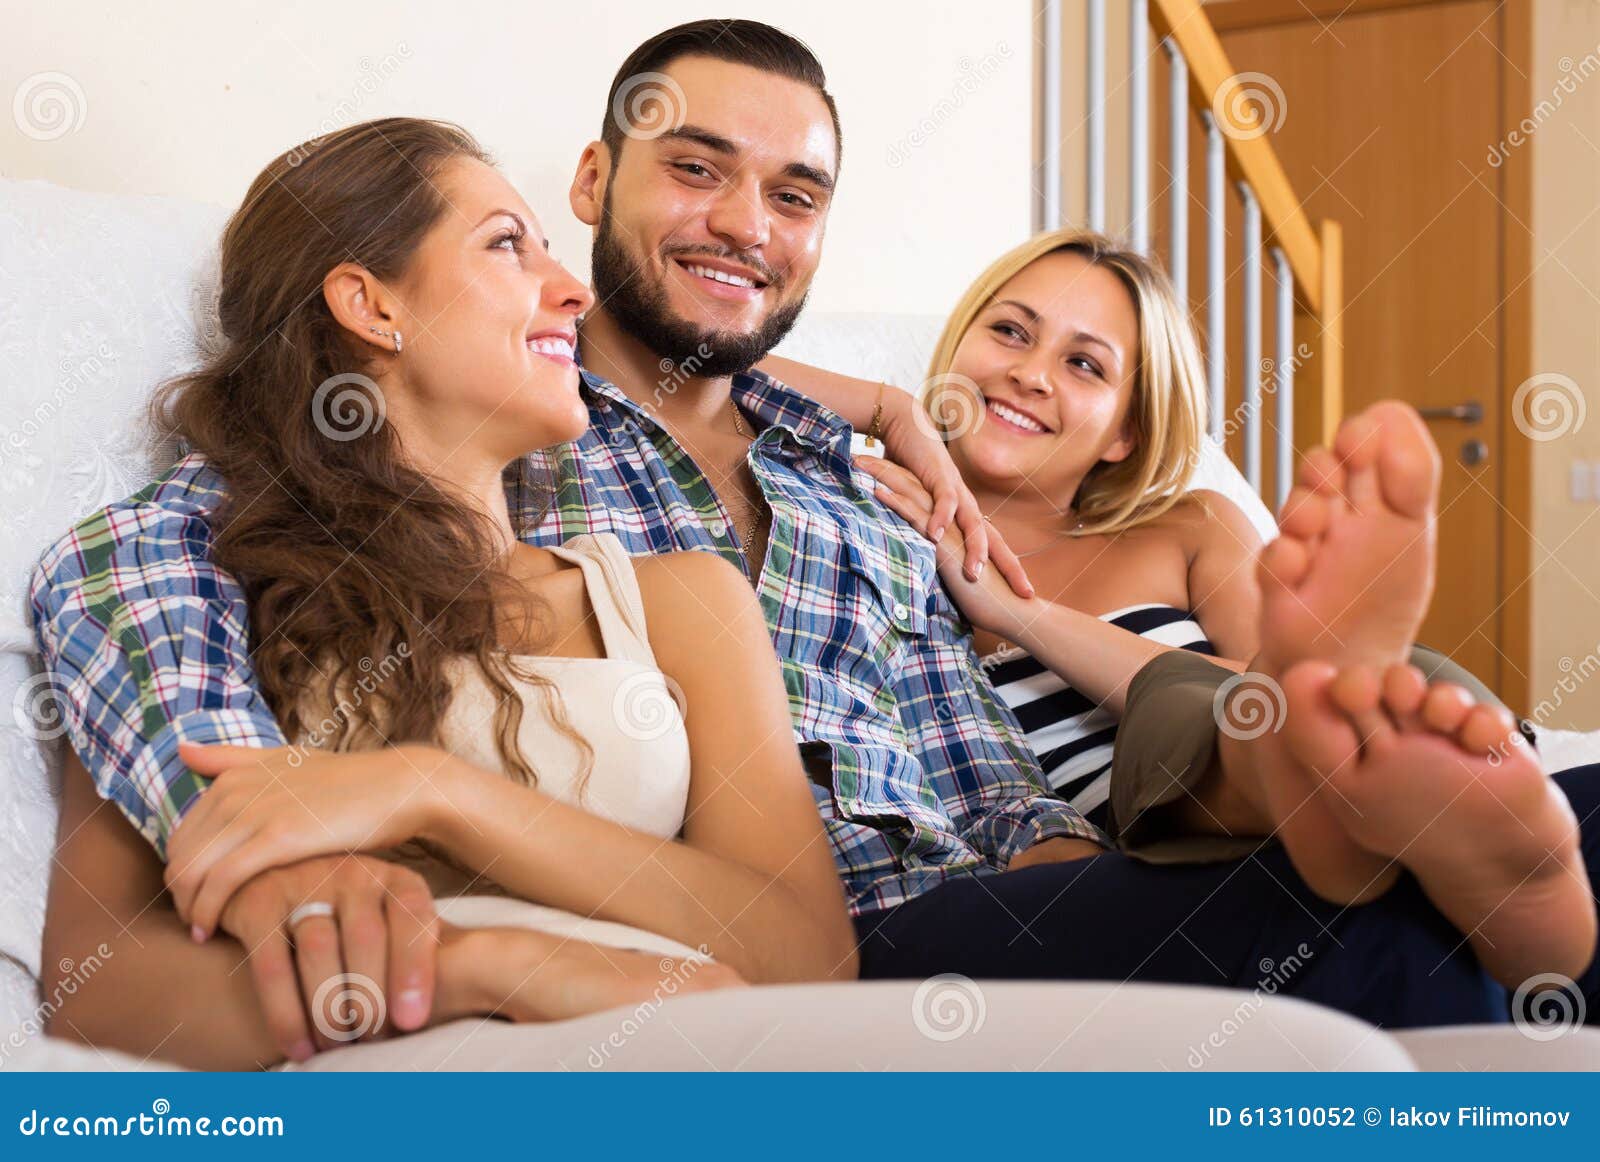 Modern Polygamous Family Stock Photo Image Of American 61310052